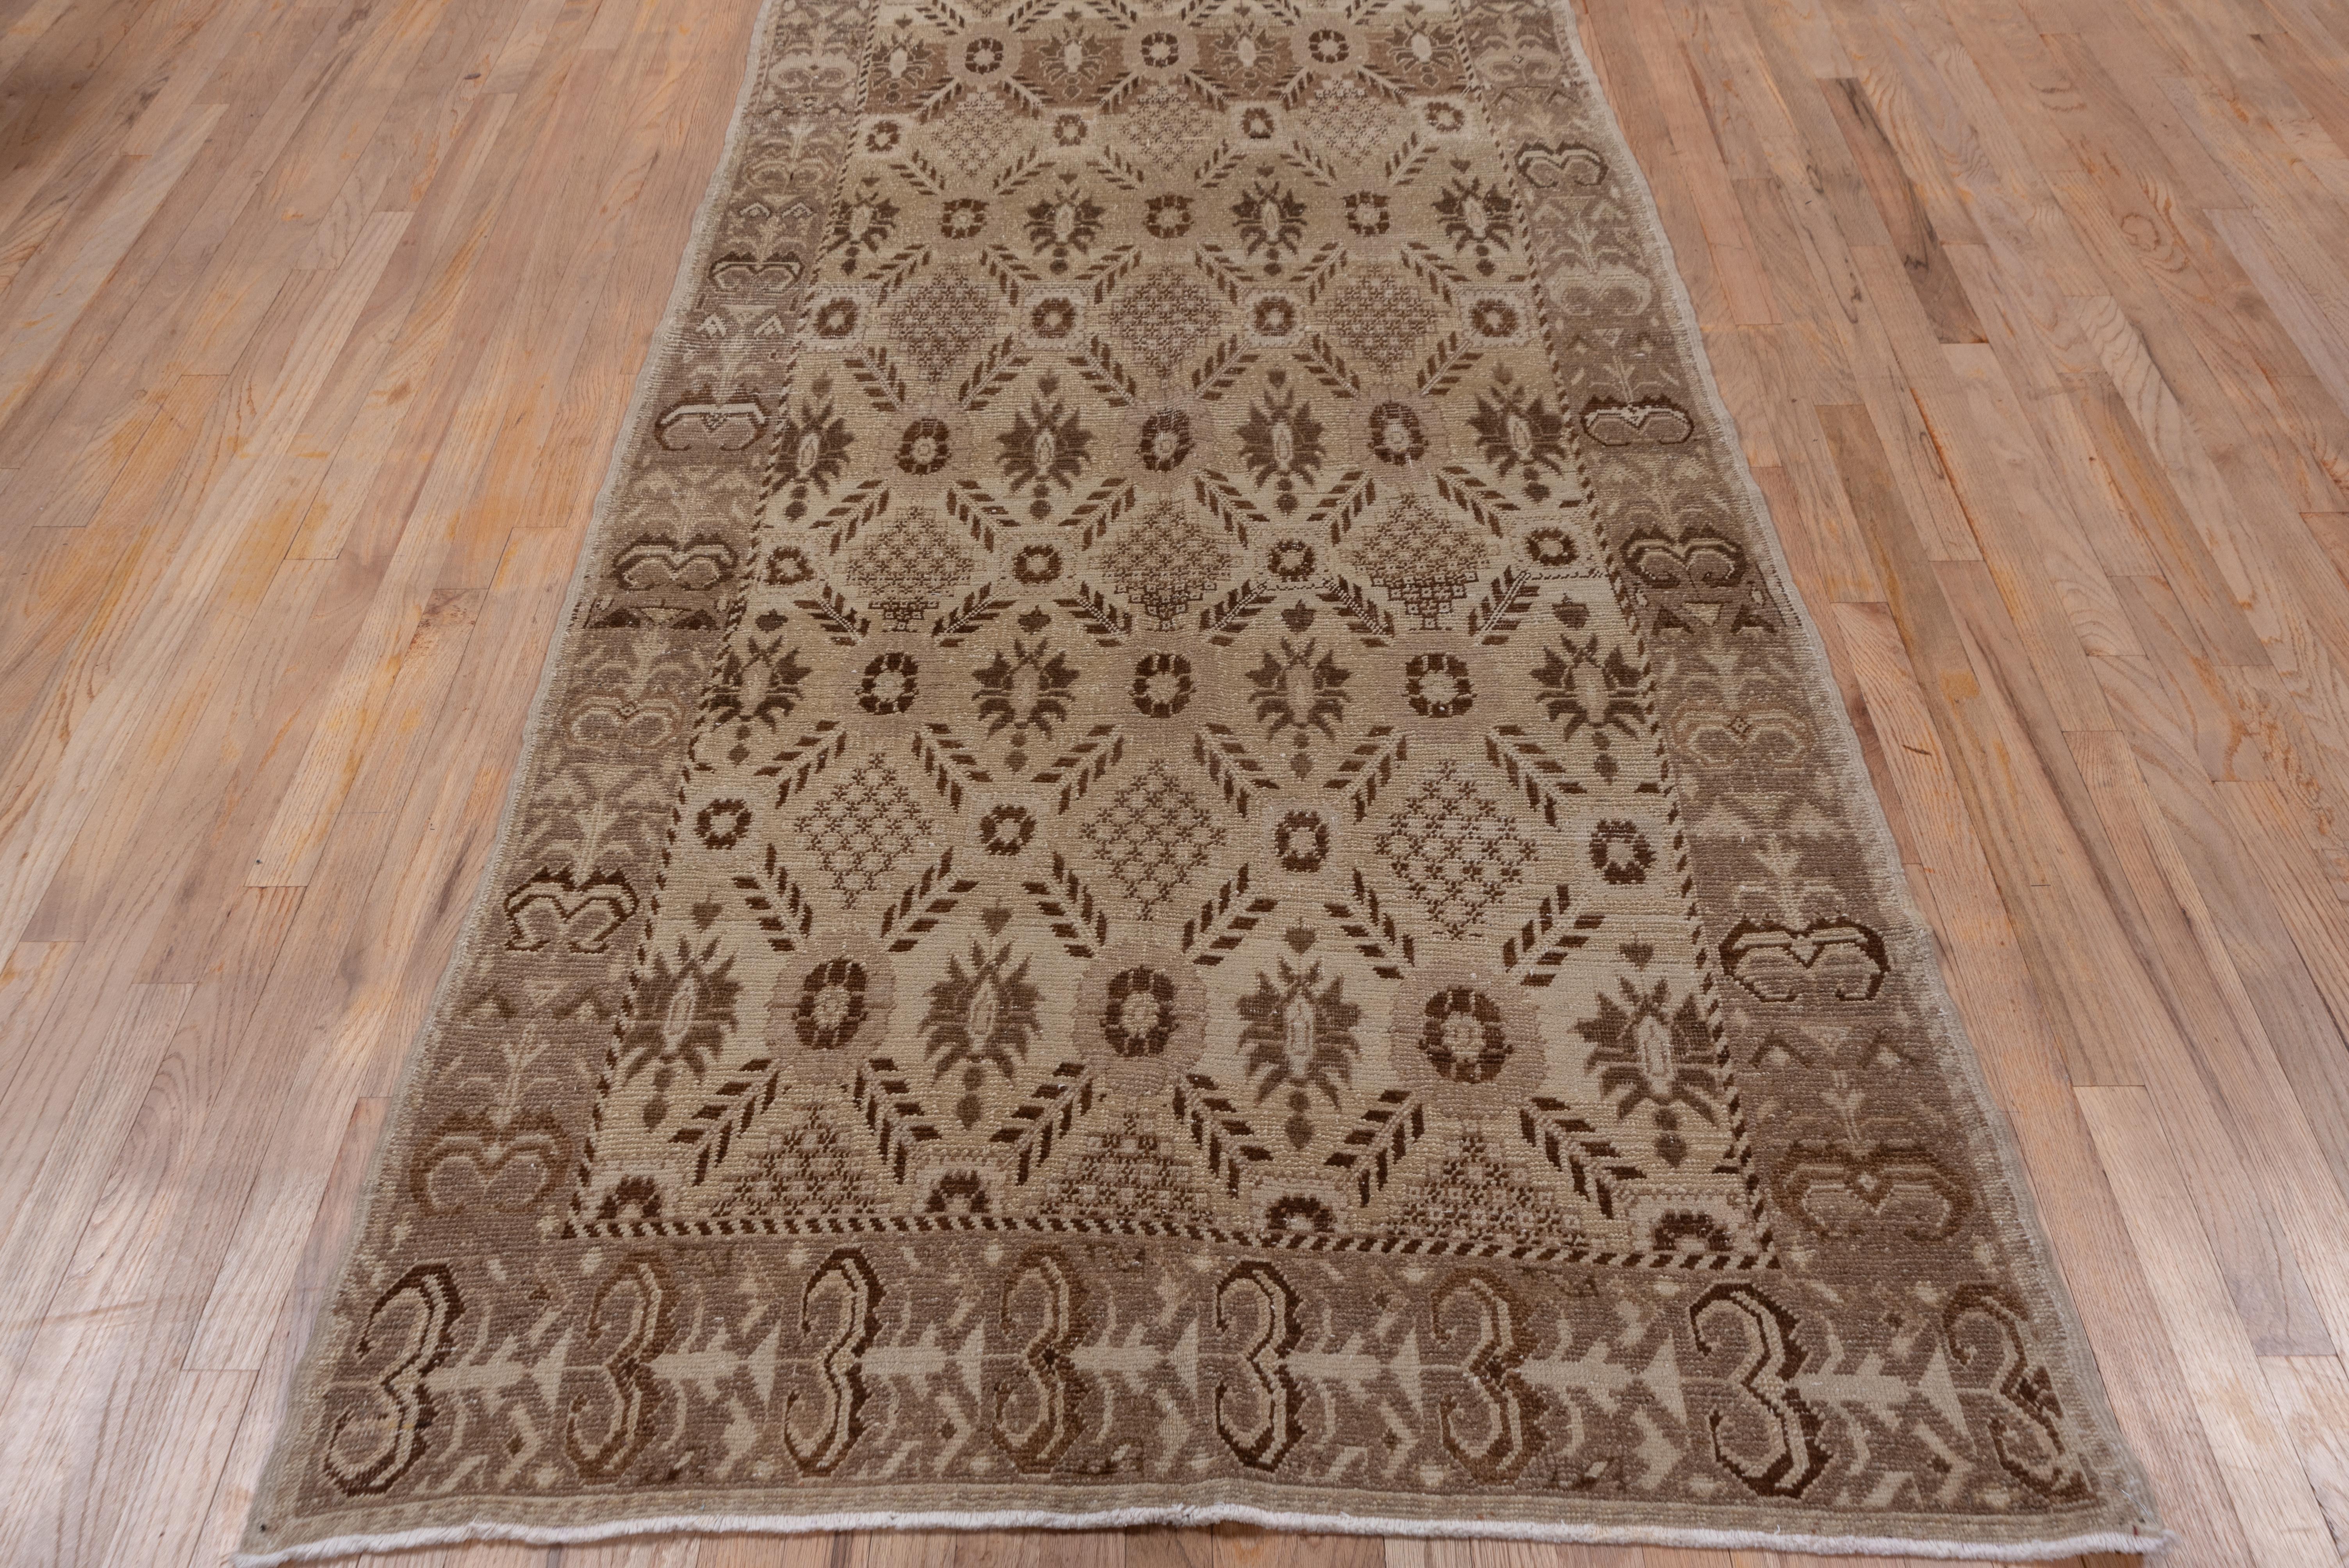 This Persianate design of feathery diagonal leaves forms a lattice with rosette vertices and enclosing simple jagged palmettes., on the straw-beige ground, detailed in sienna brown. The progressive flower module main border is also Persian in